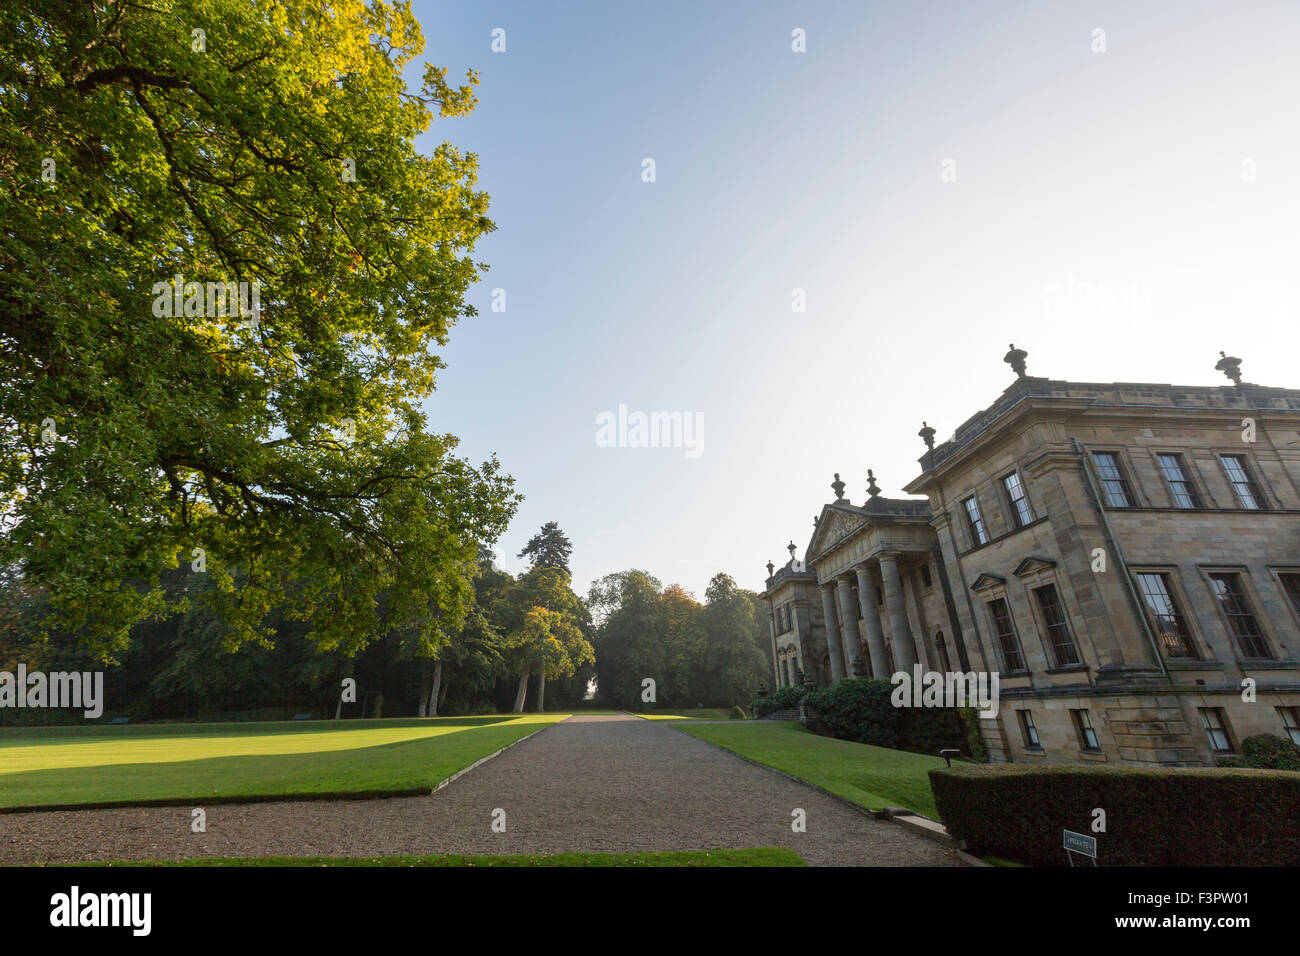 Duncombe Park House and gardens, Helmsley, North Yorkshire, England, United Kingdom Banque D'Images